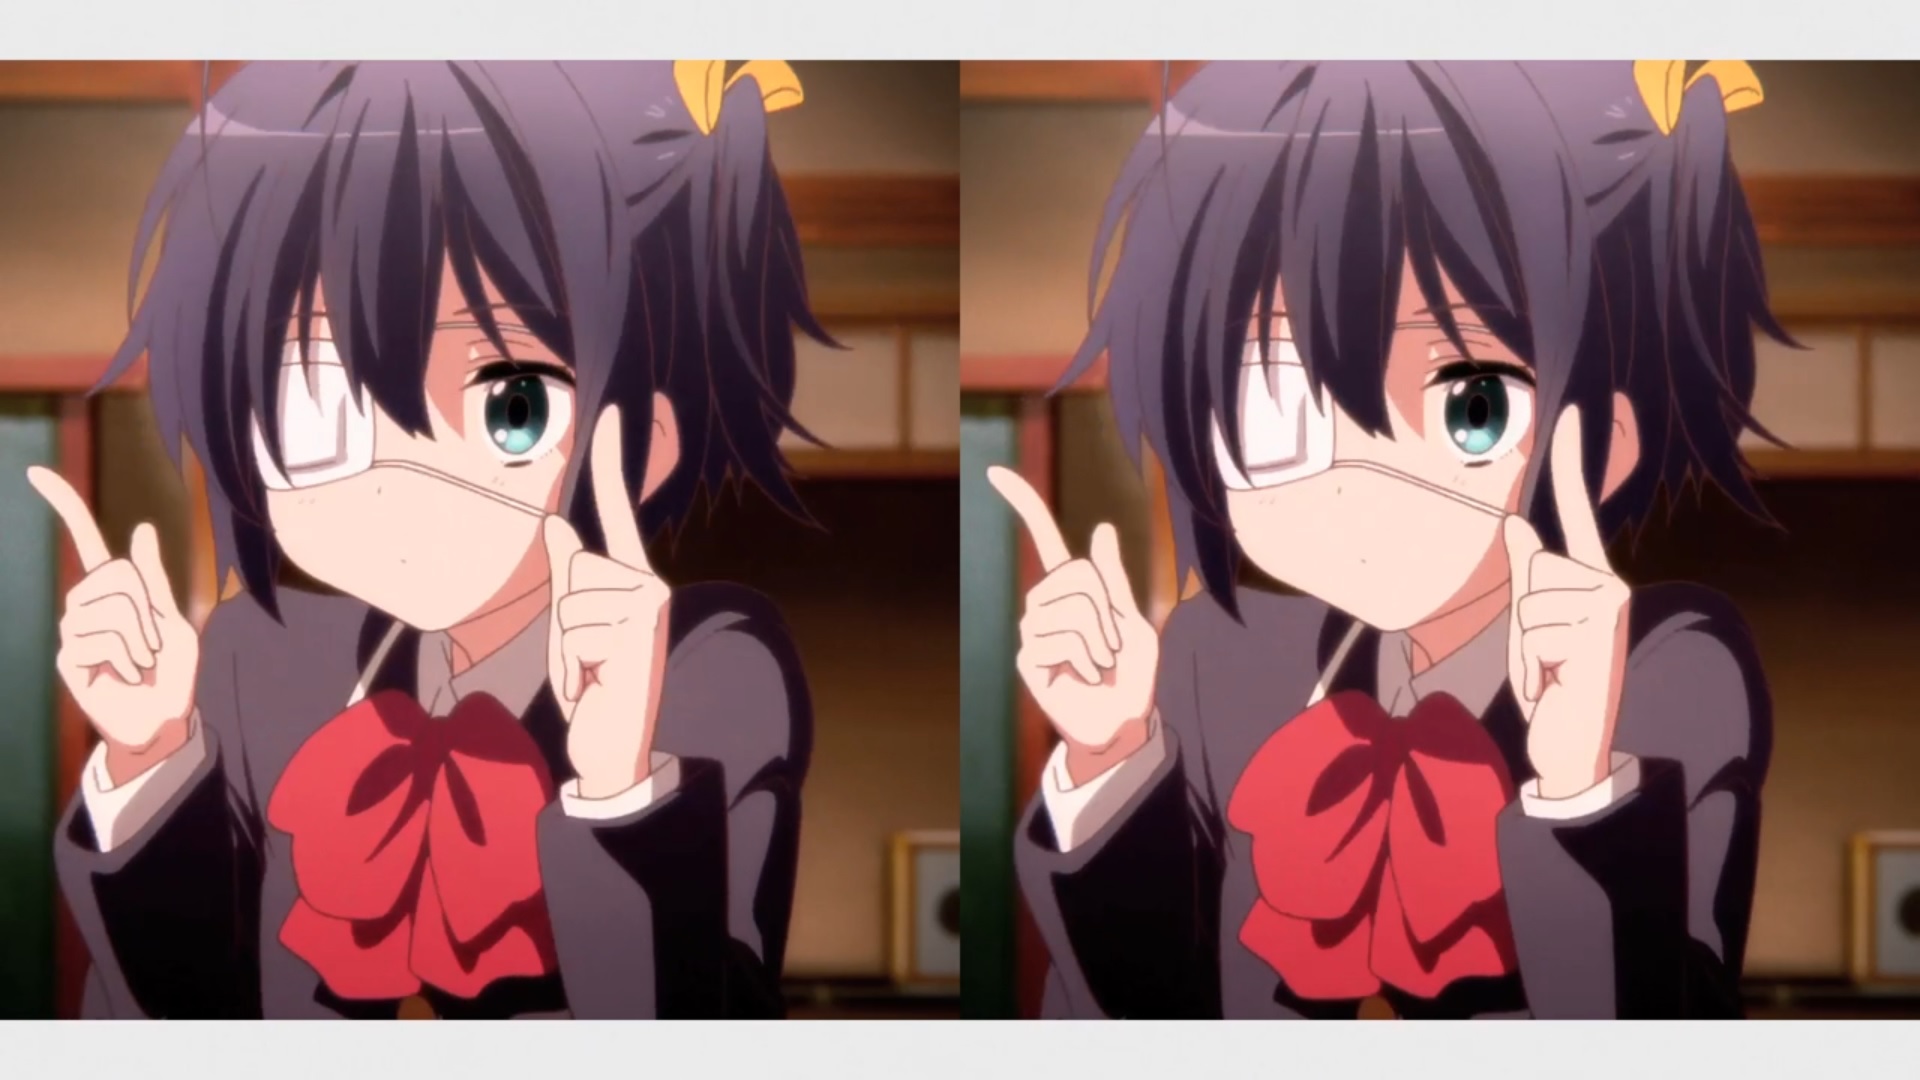 Rika Takanashi does a goofy finger dancer in a scene from the opening animation of the Love, Chunibyo & Other Delusions TV anime.